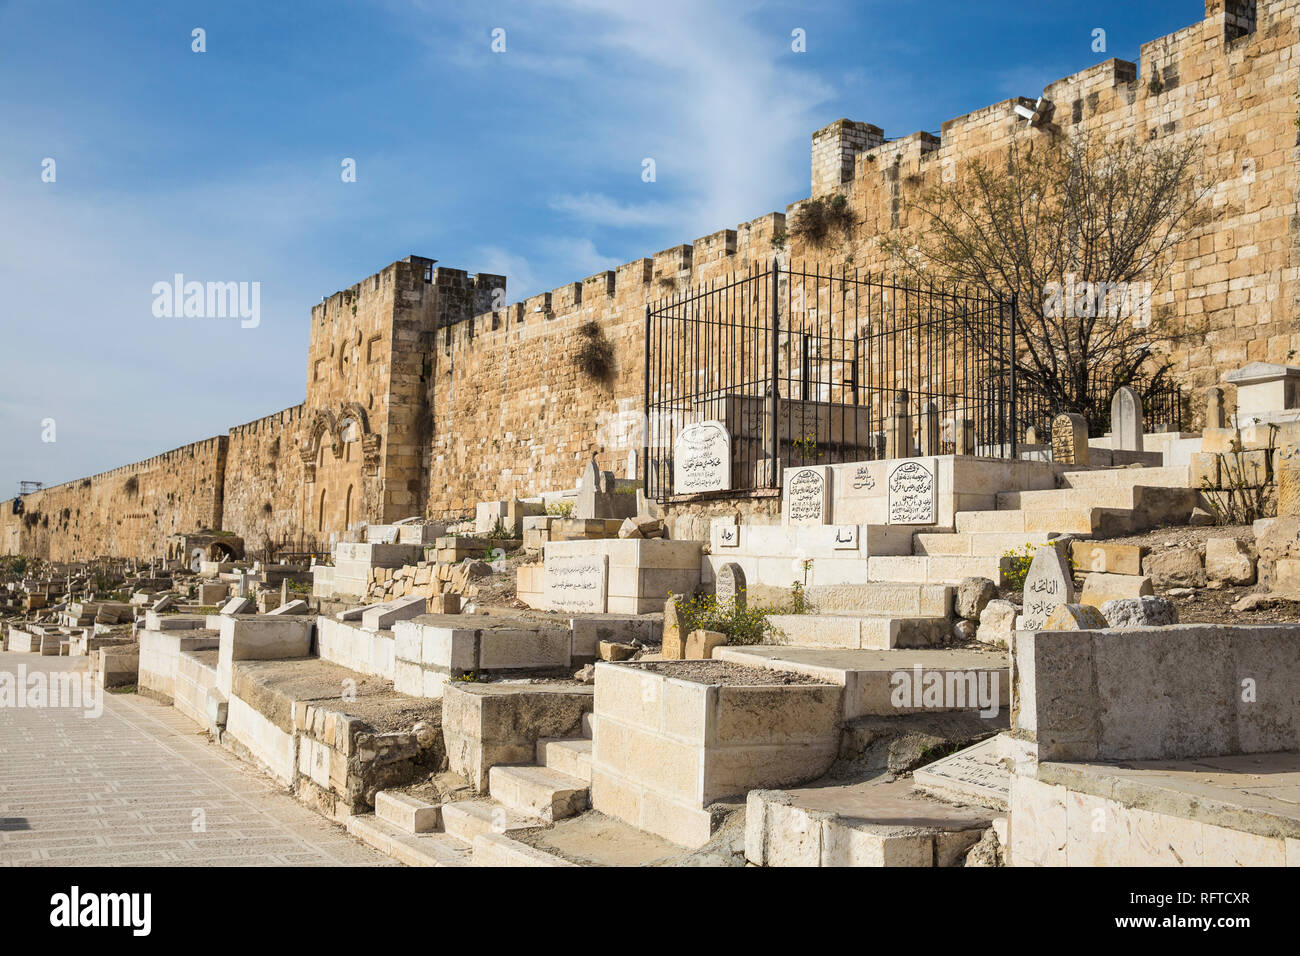 Bab Sitna Mariam Islamic cemetery near St. Stephen's Gate (The Lion Gate), Jerusalem, Israel, Middle East Stock Photo